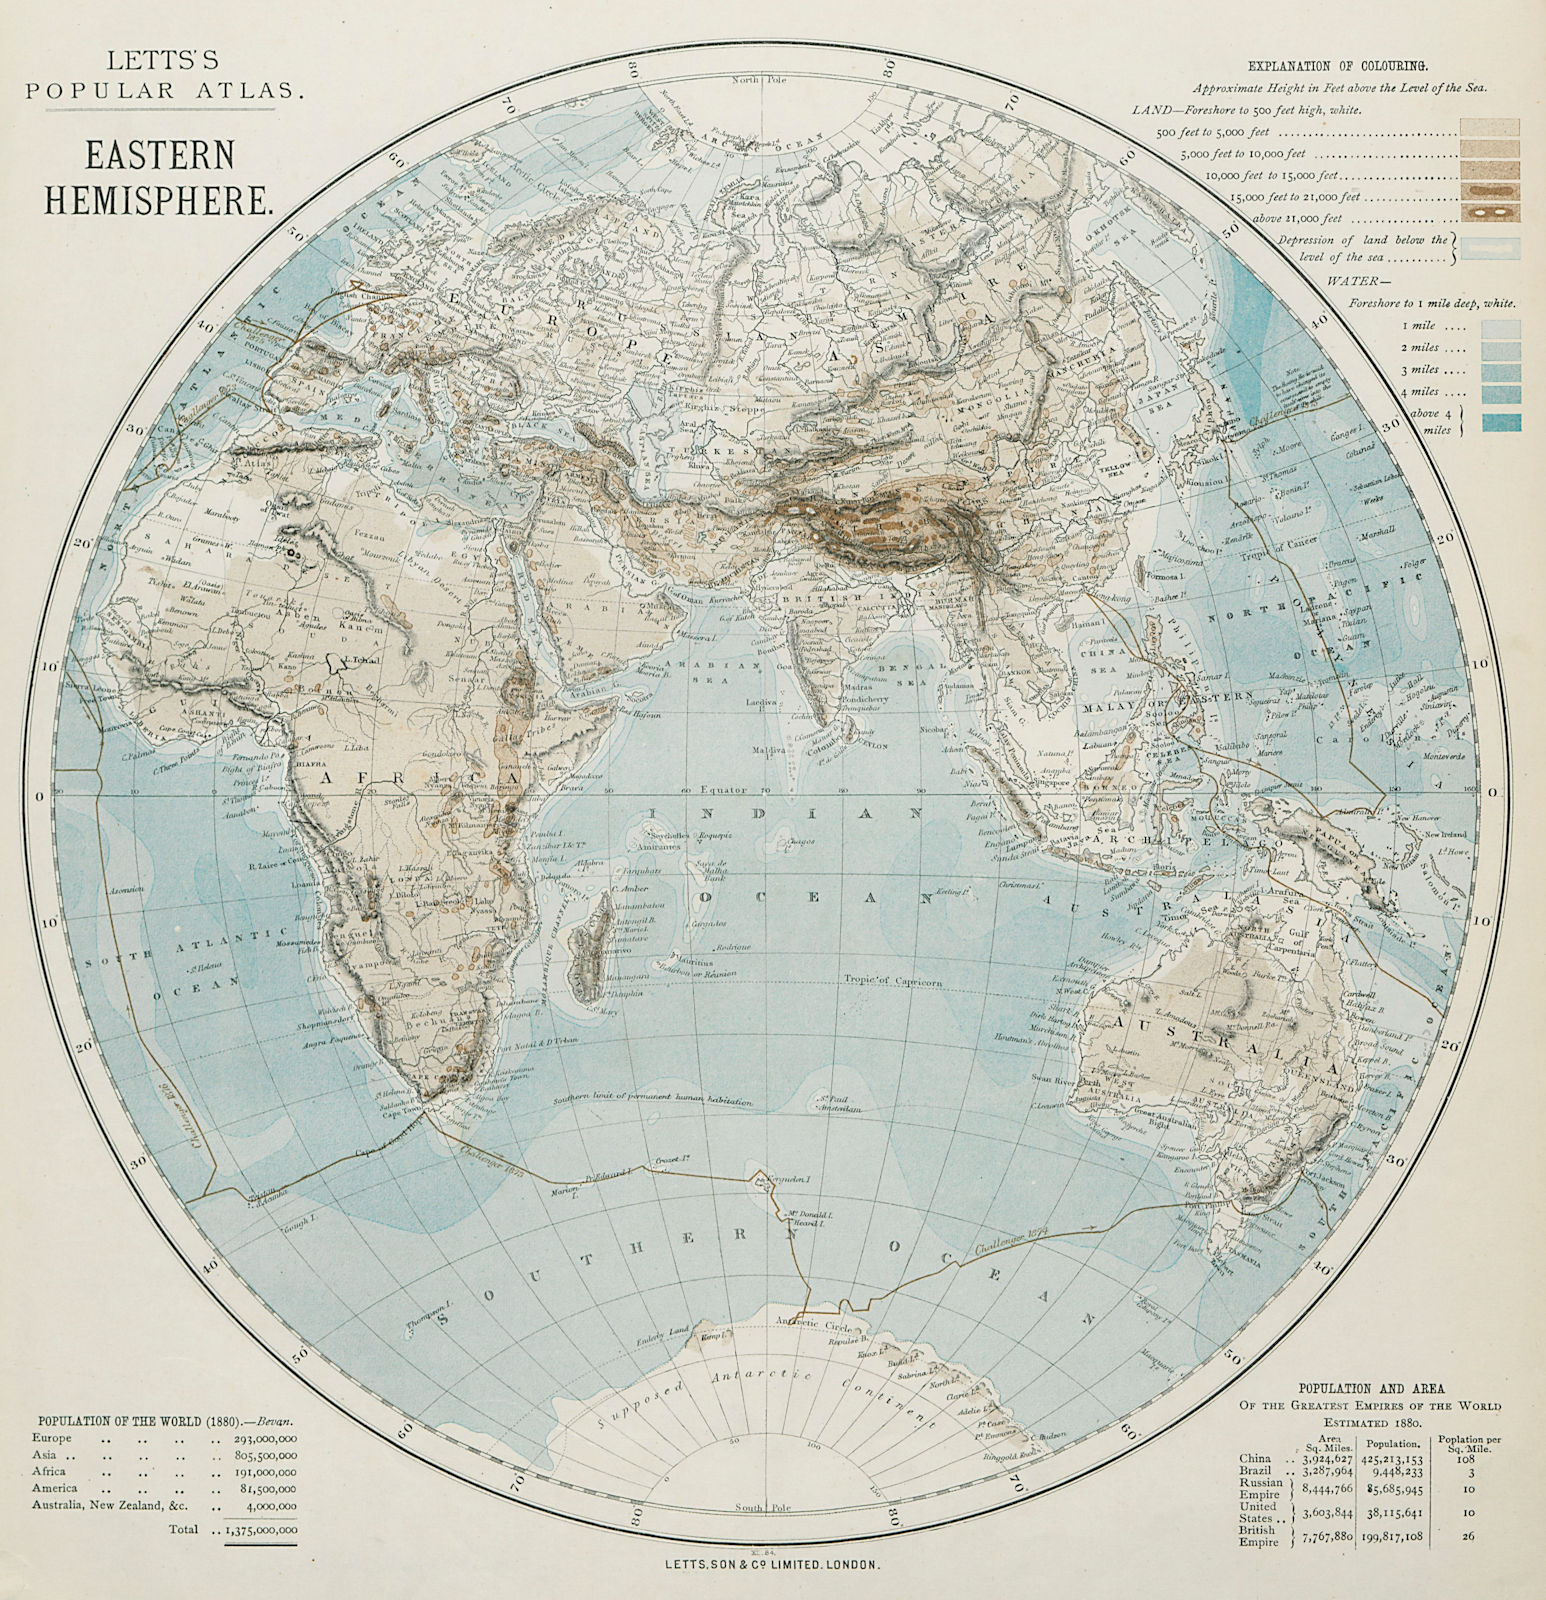 Associate Product EASTERN HEMISPHERE relief. Europe Africa Asia Australia. LETTS 1884 old map